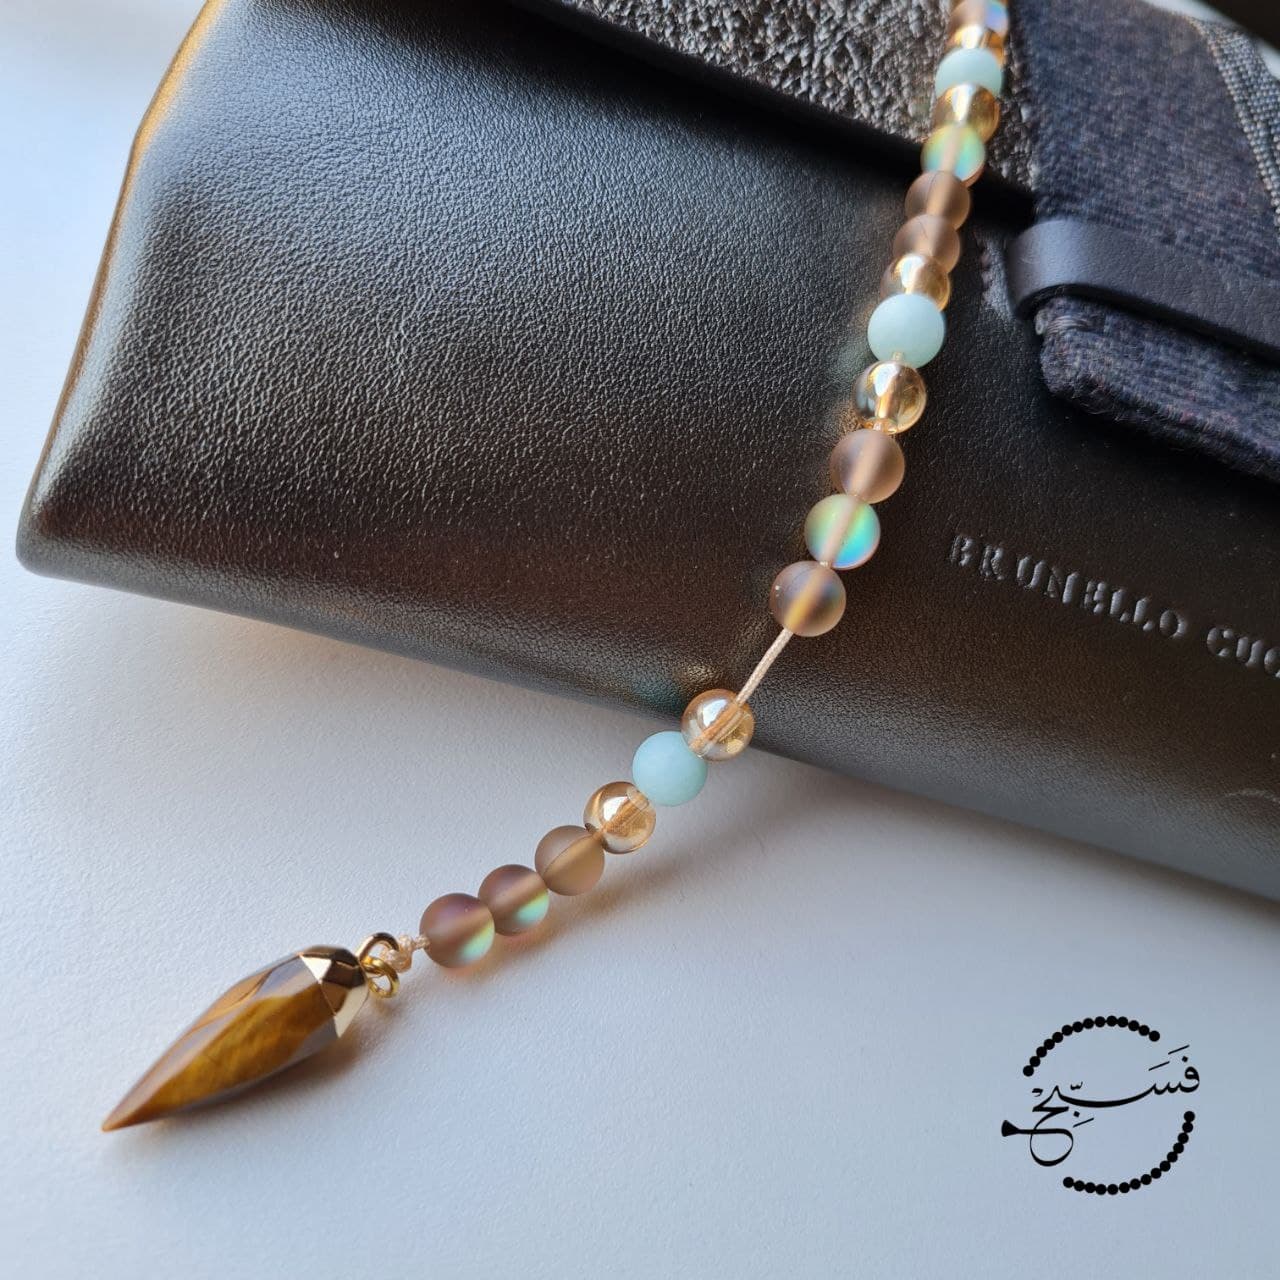 This bag charm features a tiger eye pendant with coffee coloured moonstone and amazonite beads.   33 bead tasbih that can be attached to your bag.   Packaged in a luxurious pouch and a gift box.